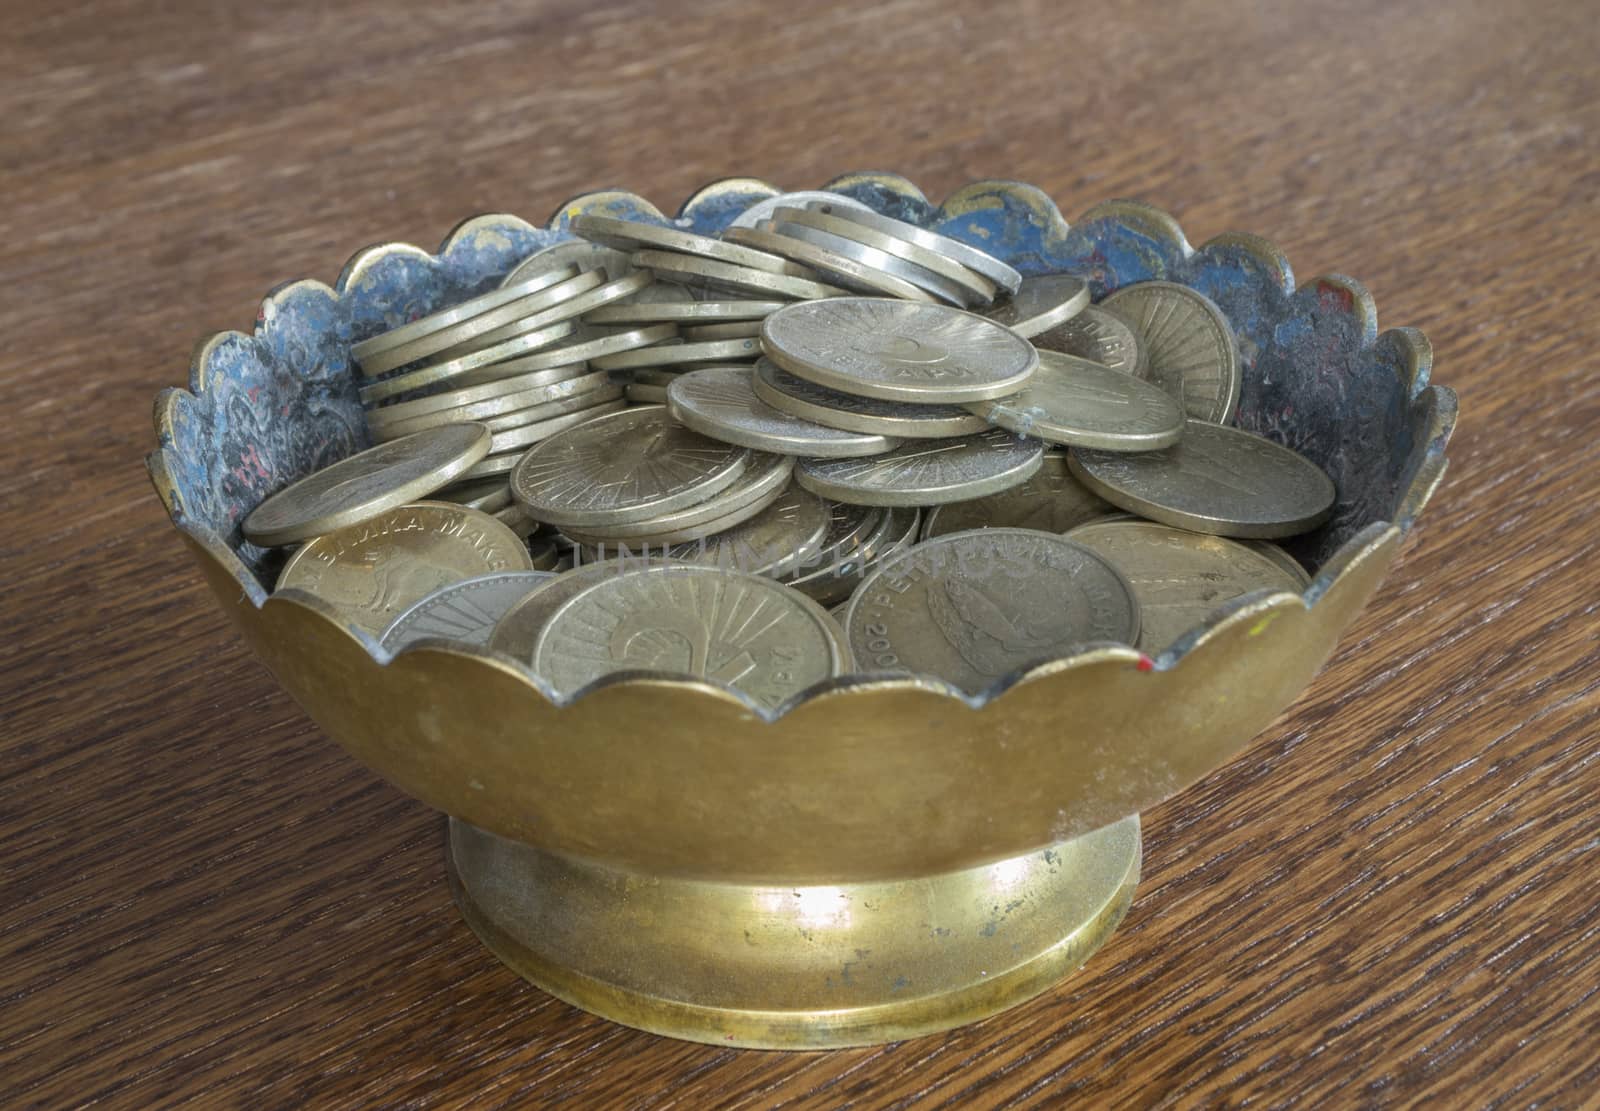 Bras cup filled with coins